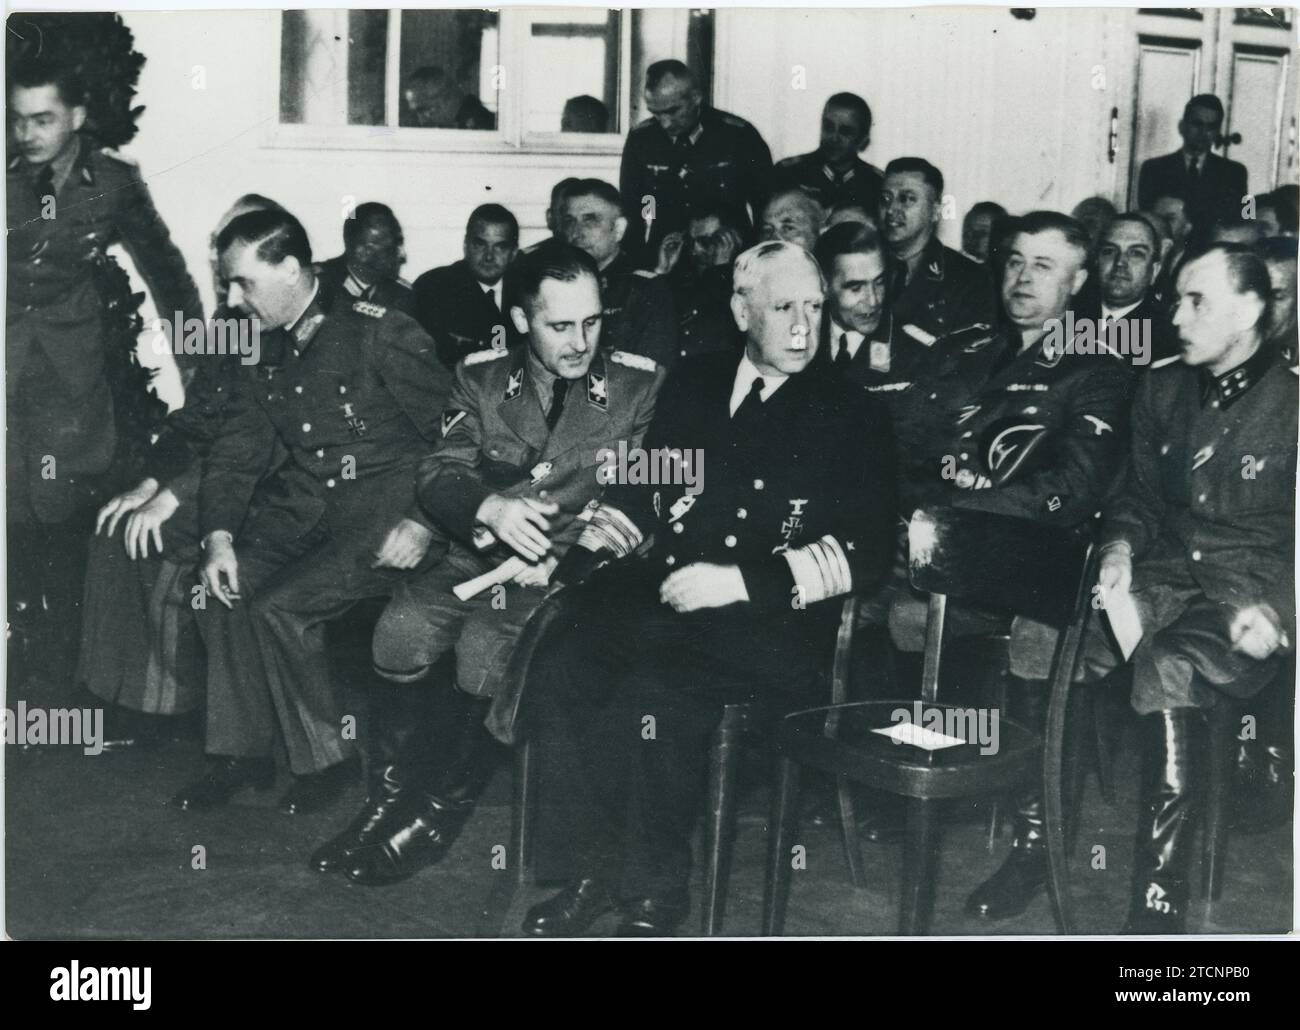 Prague (Czech Republic), 05/18/1942. Secret conference for collaboration on new bases between the Abwehr, the RSHA and the Gestapo. In the foreground of the image Wilhelm Canaris. Credit: Album / Archivo ABC Stock Photo